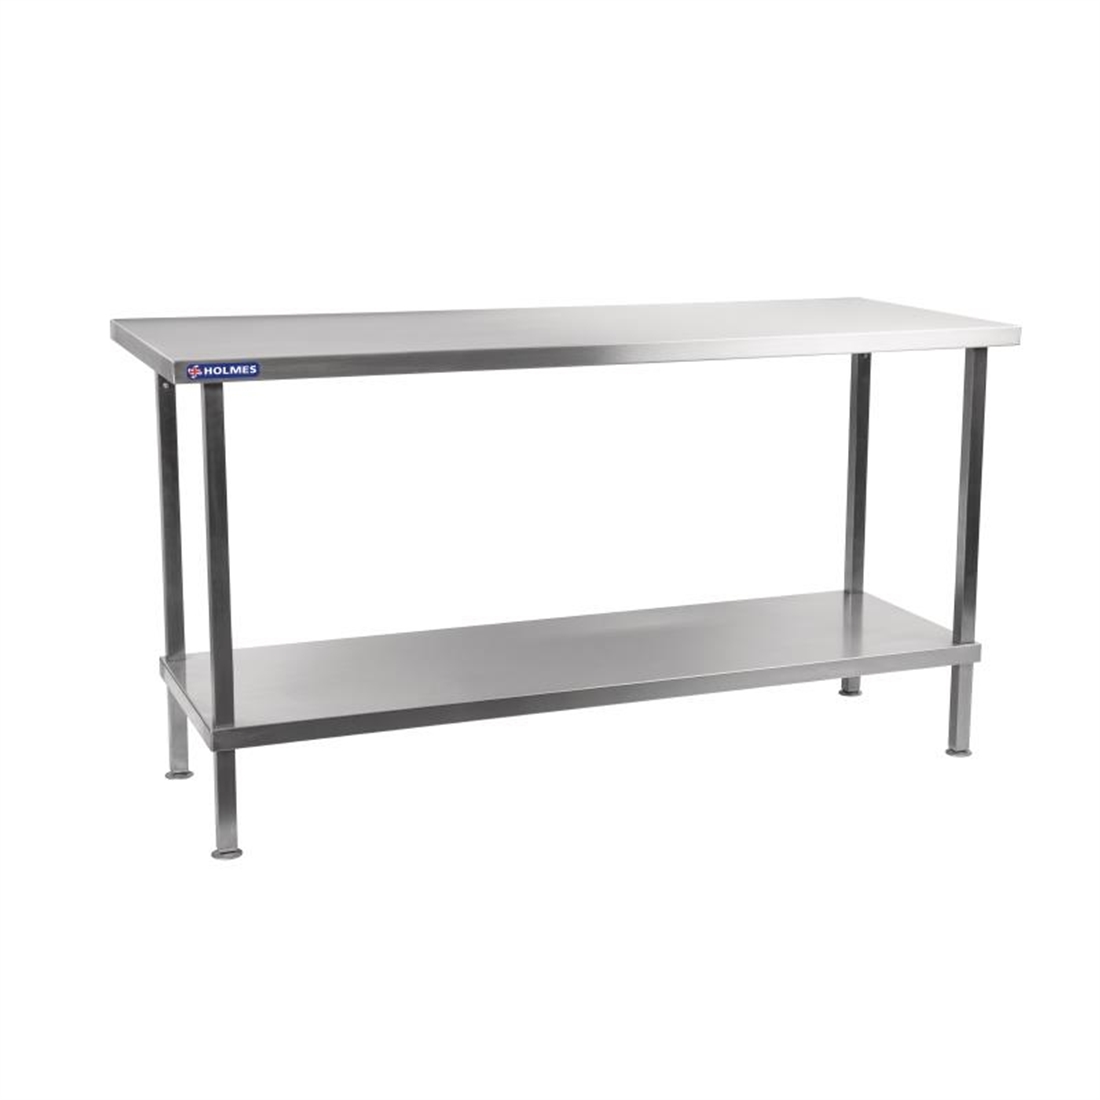 Holmes Self Assembly Stainless Steel Centre Table 2100mm